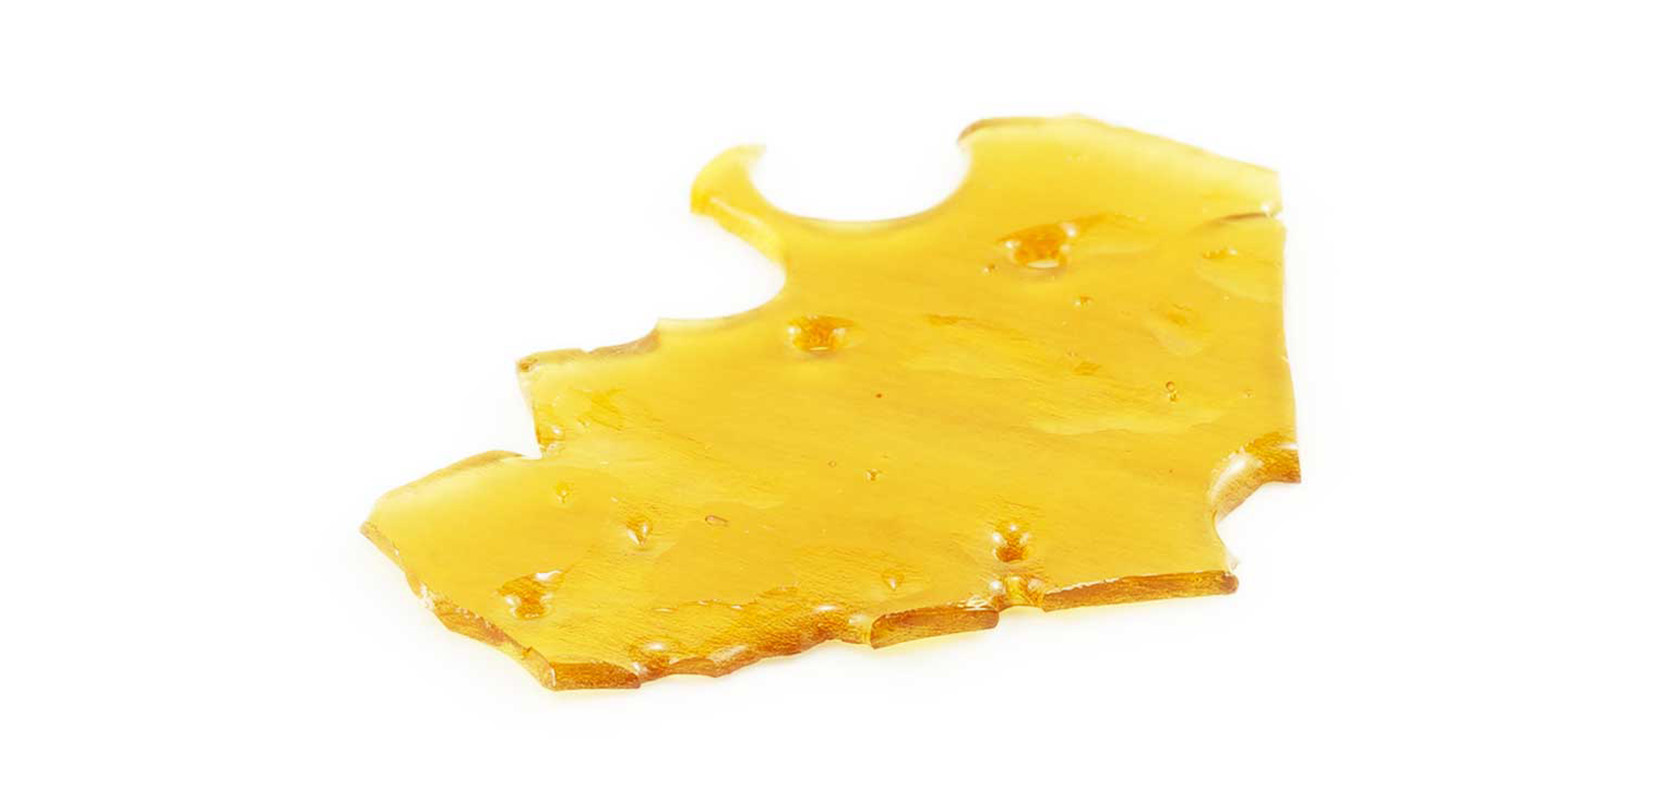 Do Si Do shatter weed dab drug THC concentrate. Buy cheap shatter online in Canada from Low Price Bud online dispensary Canada for mail order marijuana weed online. Dispensary weed.